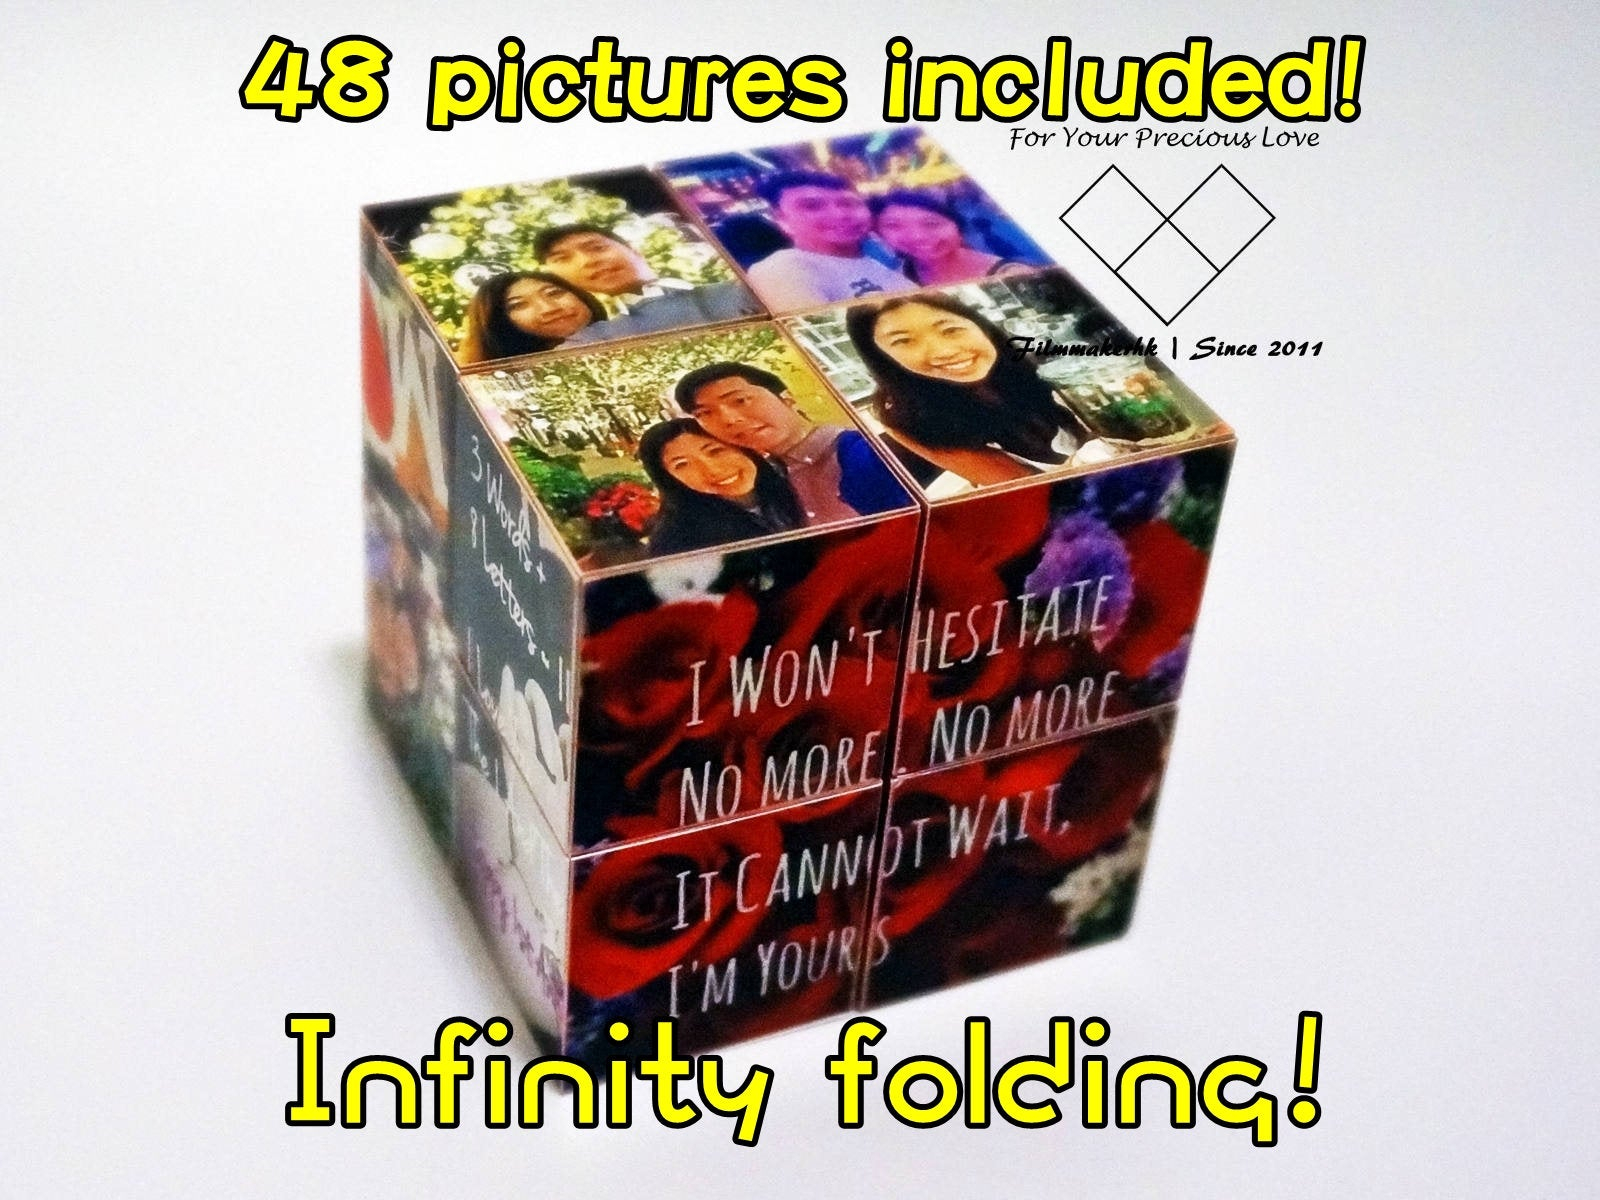 Birthday Card Ideas For Girlfriend Christmas Birthday Card Gift For Girlfriend Boyfriend Personalized Magic Block Infinity Photo Cube Custom Picture Puzzle Name Xmas Friend